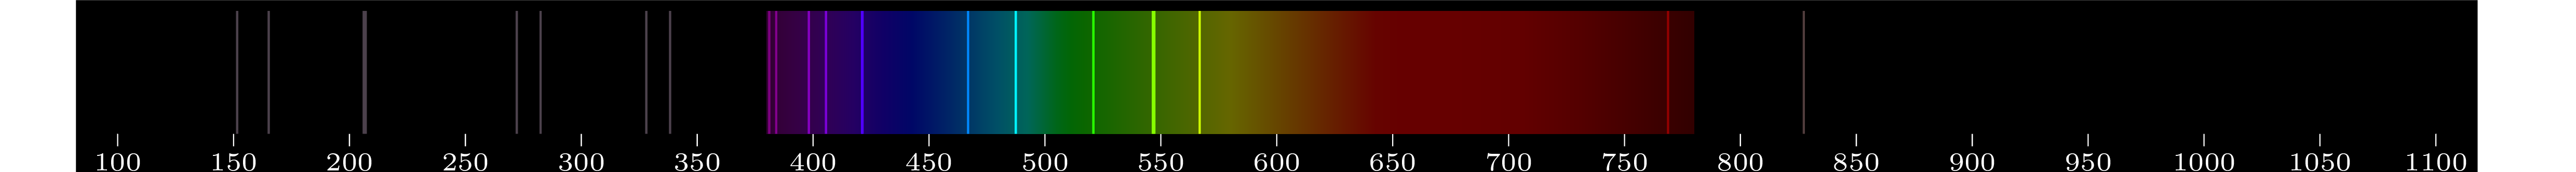 emmision spectra of element Ag